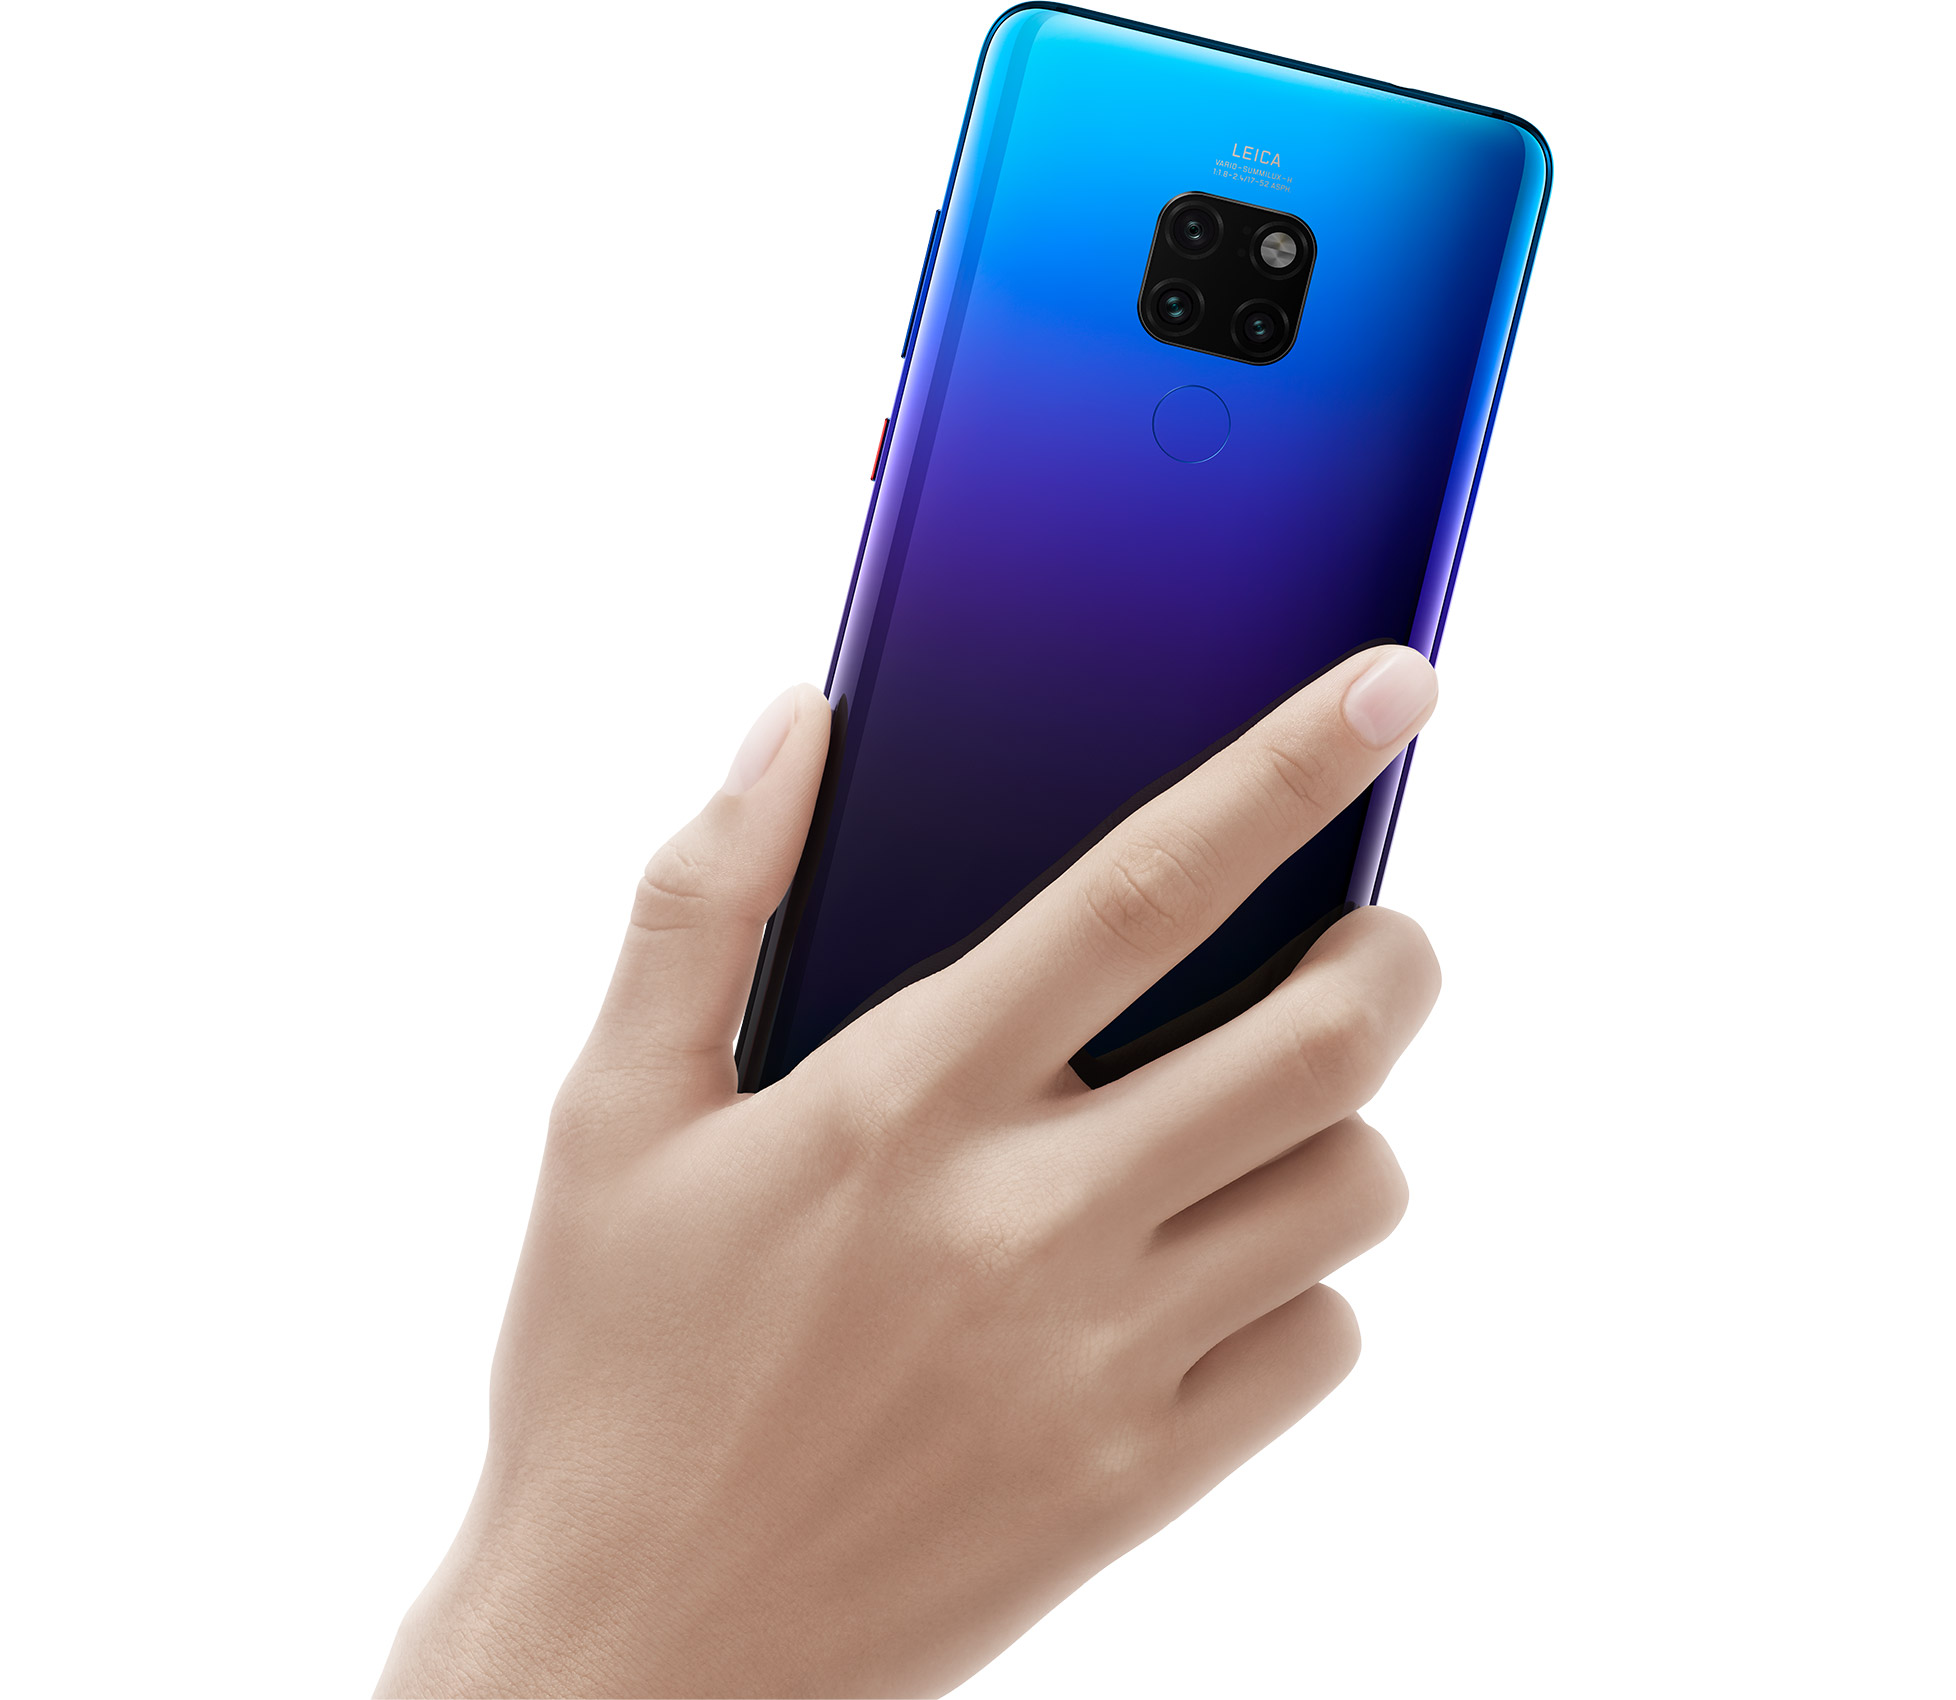 Huawei Mate 20 Specifications, Launch Date and Price